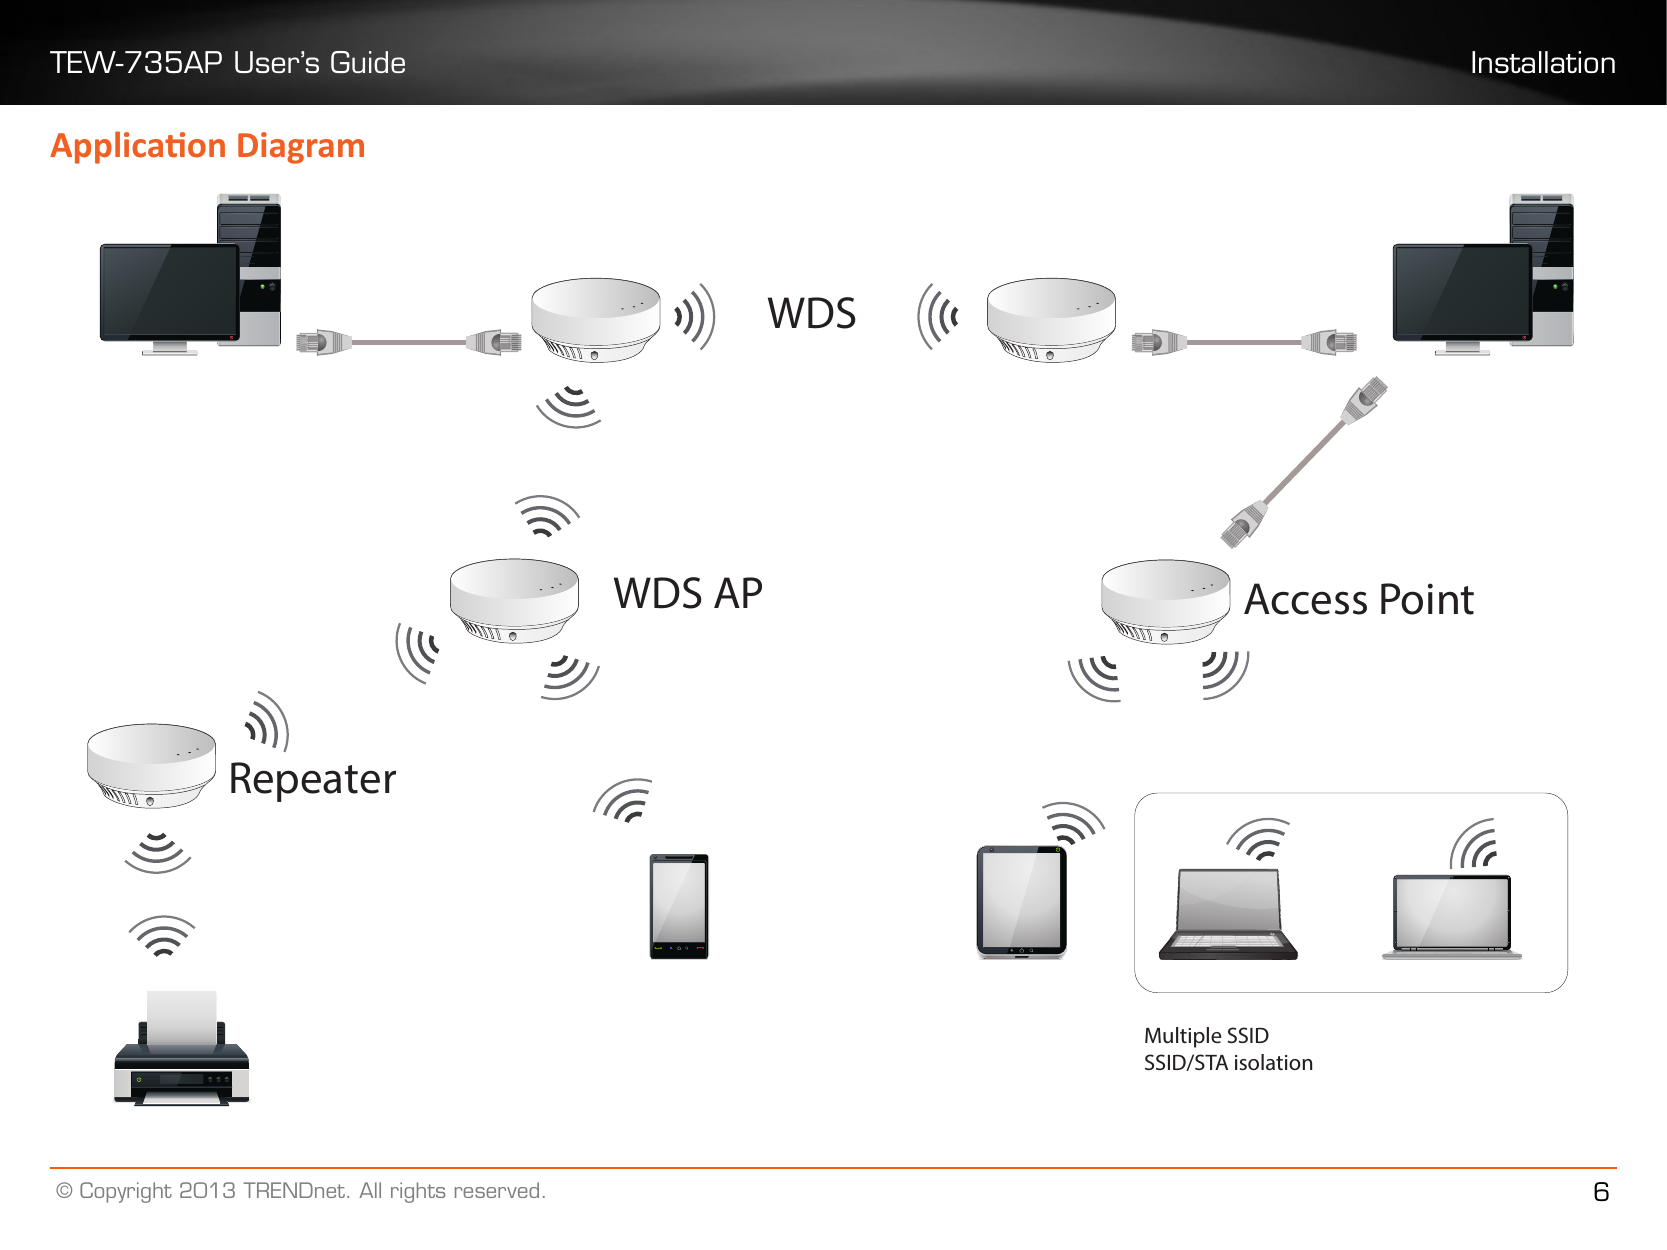 TEW-735AP User’s Guide Installation© Copyright 2013 TRENDnet. All rights reserved. 6Applicaon DiagramWDSWDS APRepeaterAccess PointMultiple SSIDSSID/STA isolation